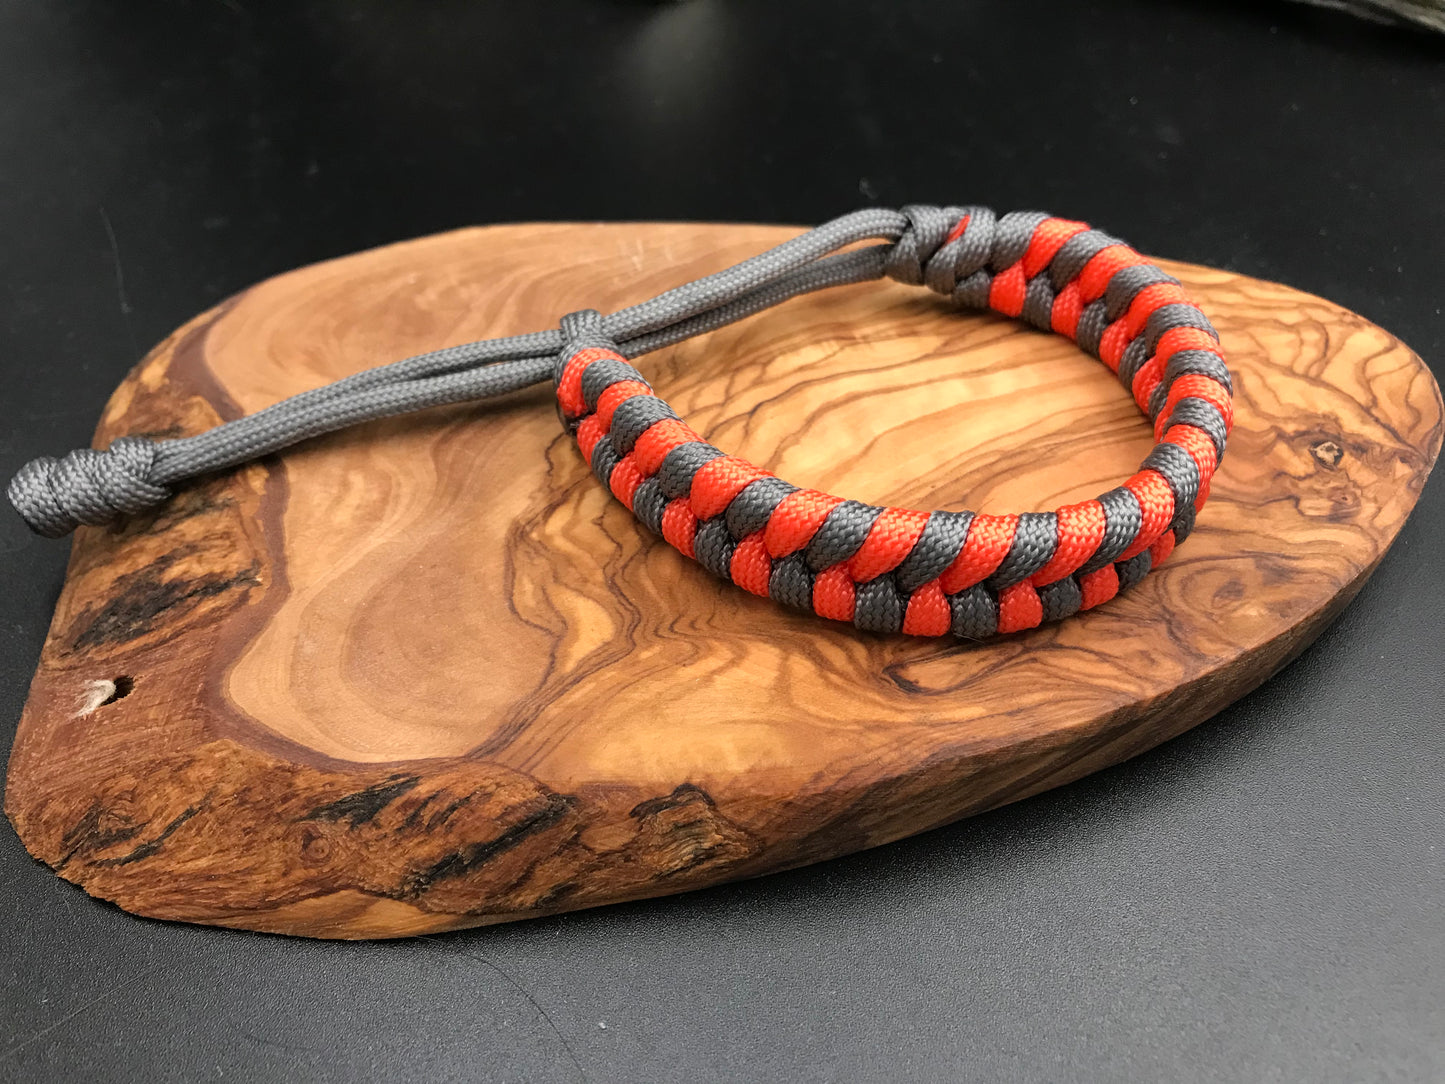 Handmade Paracord Fishtail weave bracelet in A tactical grey and orange stripe design